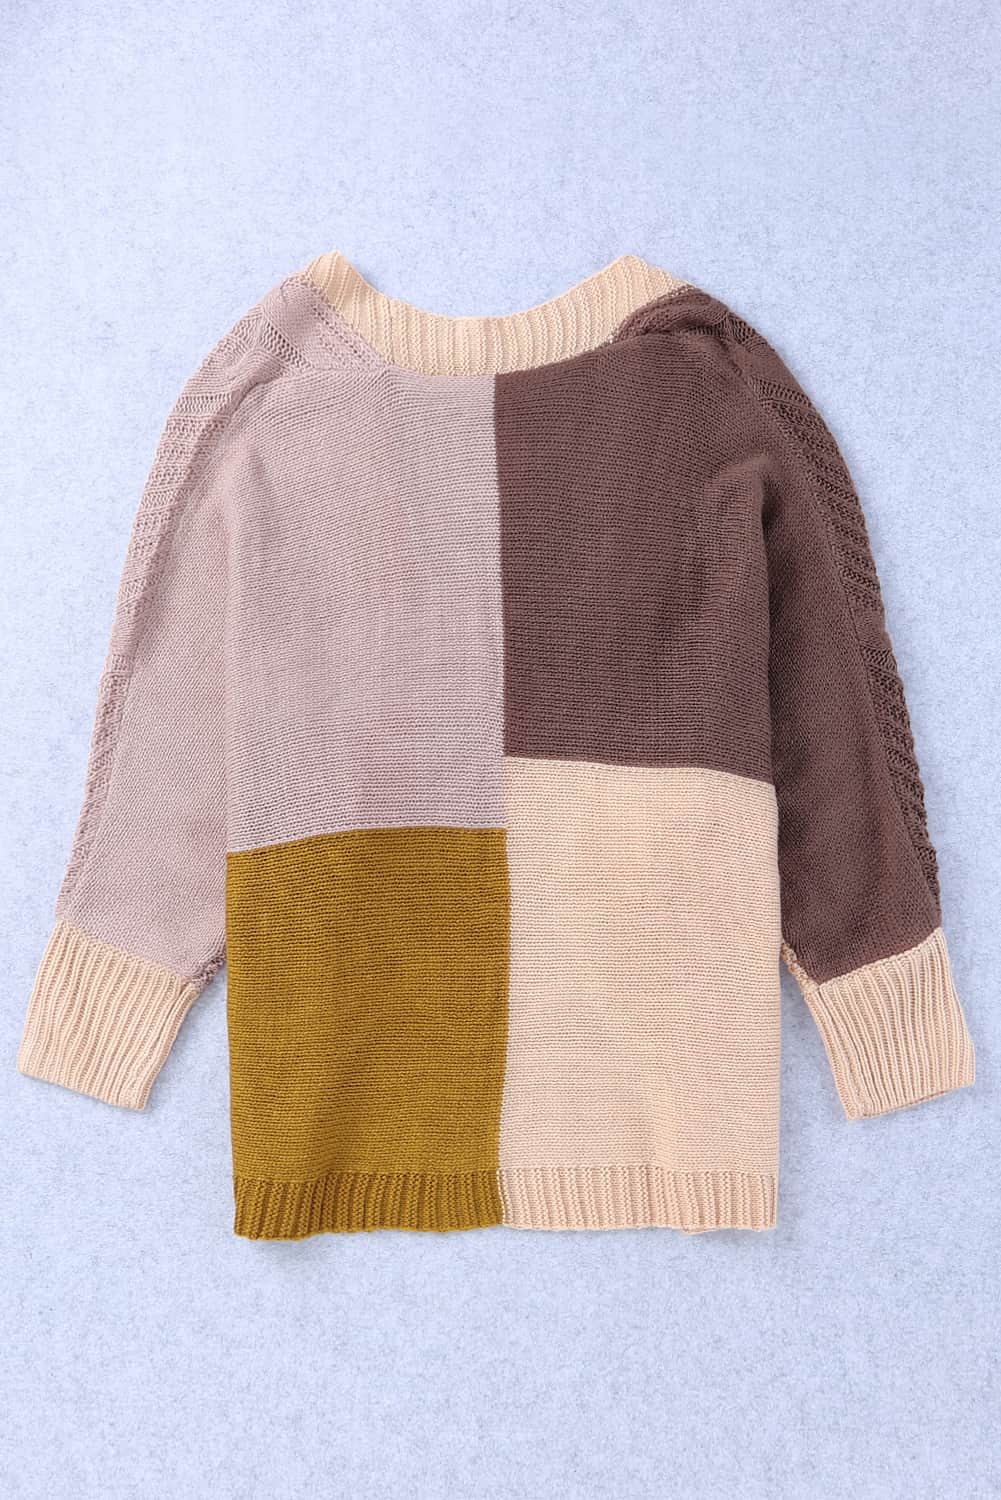 Brown Color Block Loose Open Front Knitted Cardigan